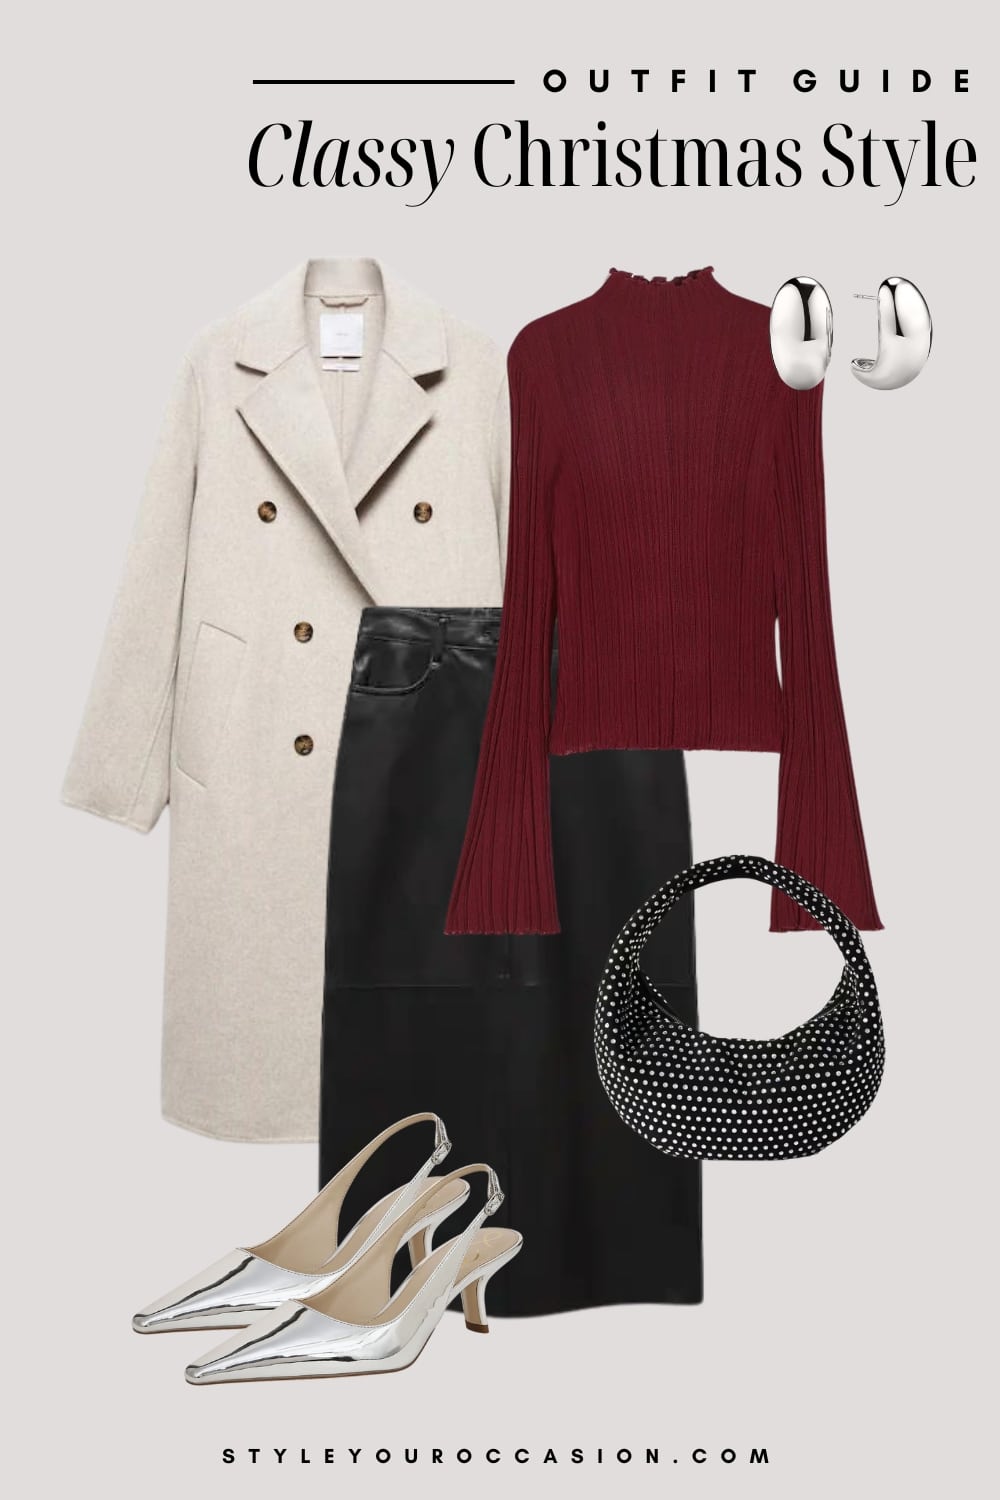 An image board of a Christmas outfit featuring a black leather midi skirt, a burgundy knit sweater, a long white coat, silver slingback heels, a silver and black handbag, and chunky silver hoop earrings